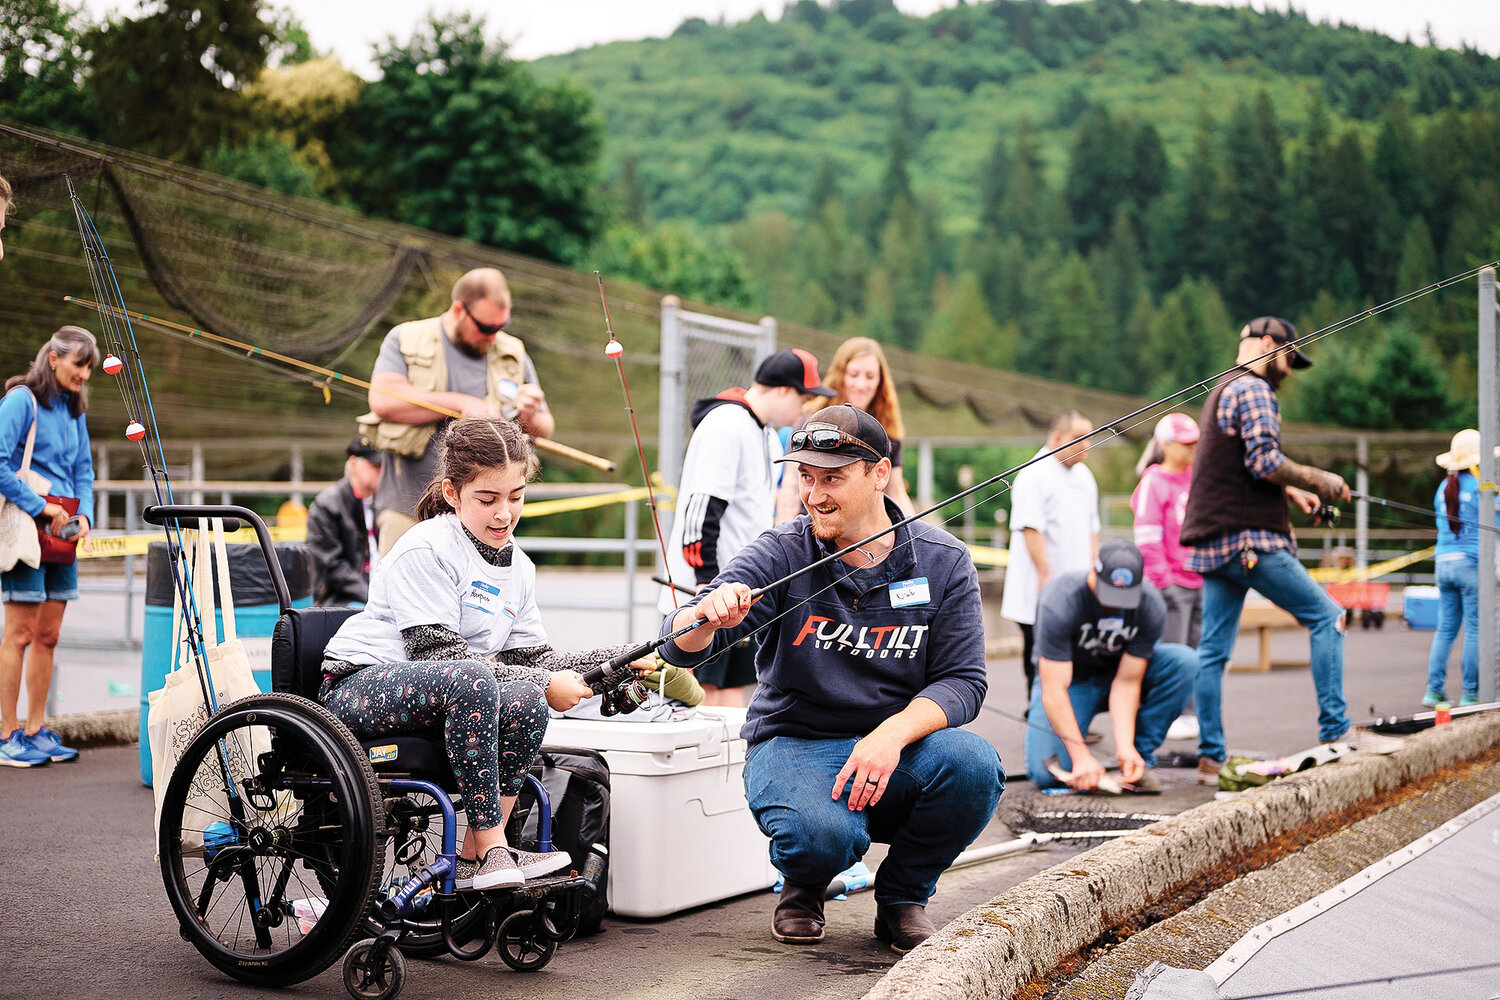 Scenes from the 23rd annual Merwin Special Kids day fishing event held at the Merwin Fish Hatchery on Saturday, July 8.